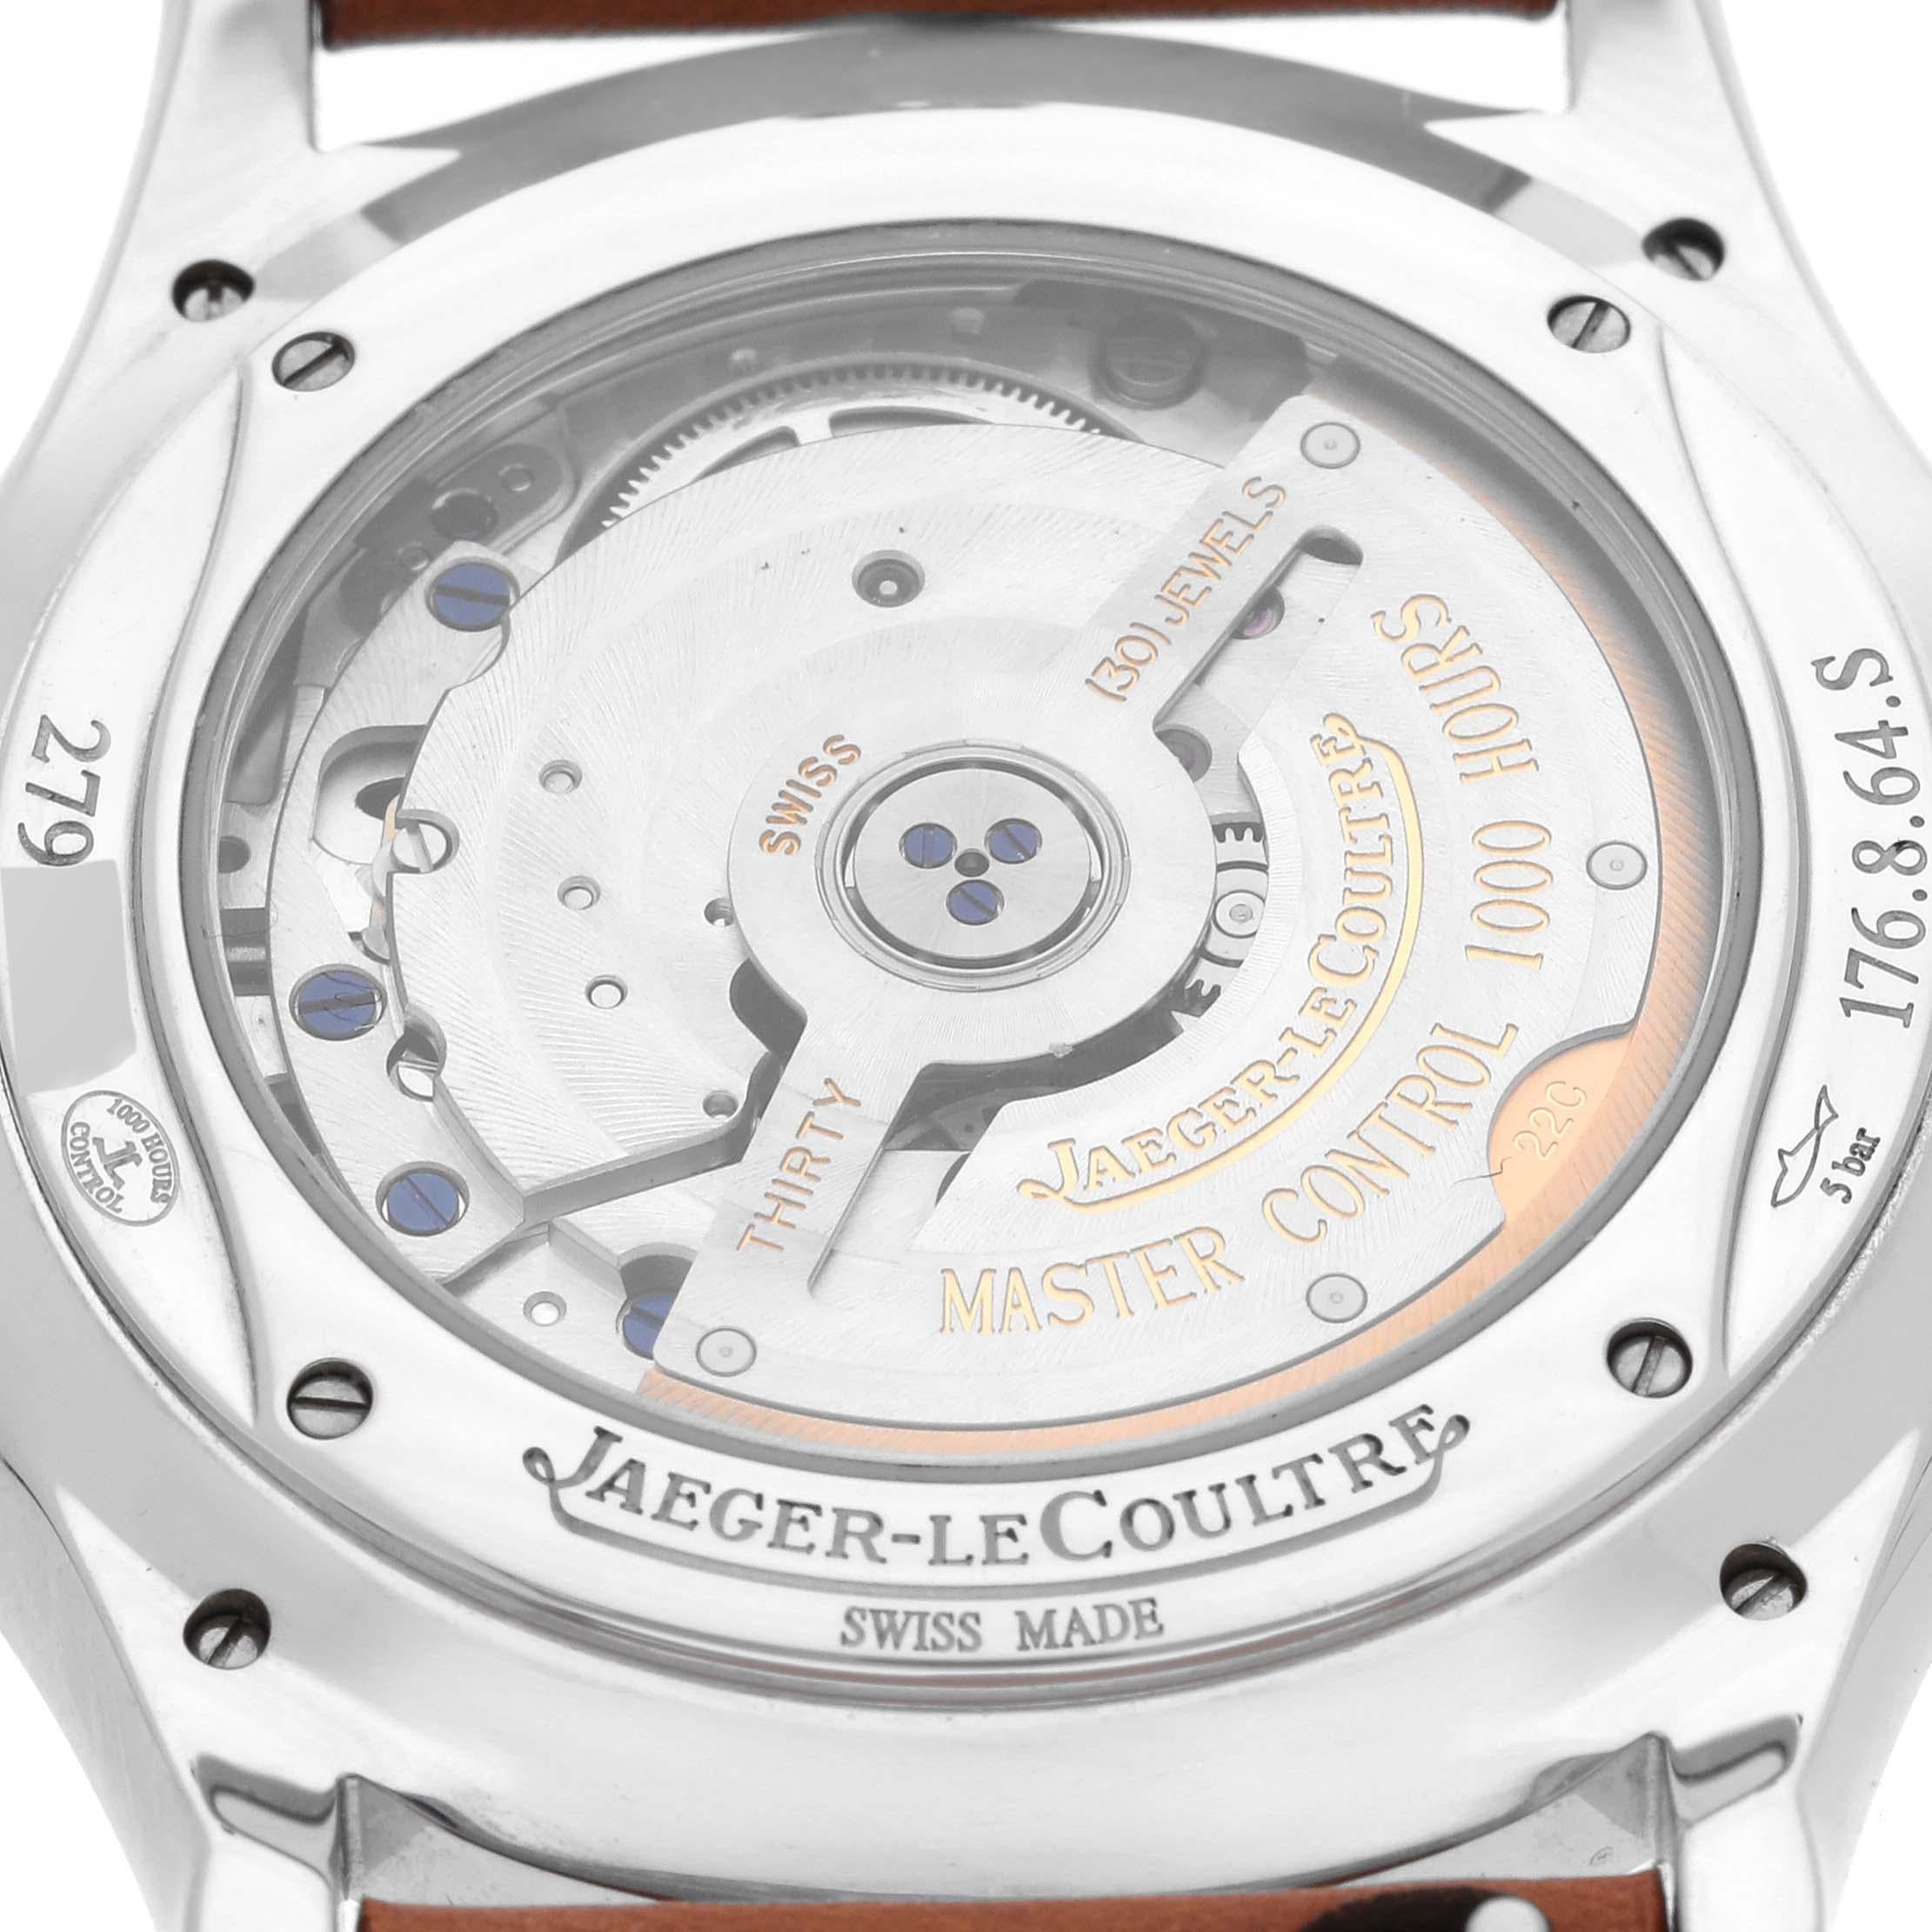 Jaeger Lecoultre Master Ultra Thin Moon Mens Watch 176.8.64.S Q1368420 Box Papers. Automatic self-winding movement. Stainless steel ultra-thin round case 39.0 mm in diameter and 10.0 mm thick. Transparent exhibition sapphire crystal caseback secured